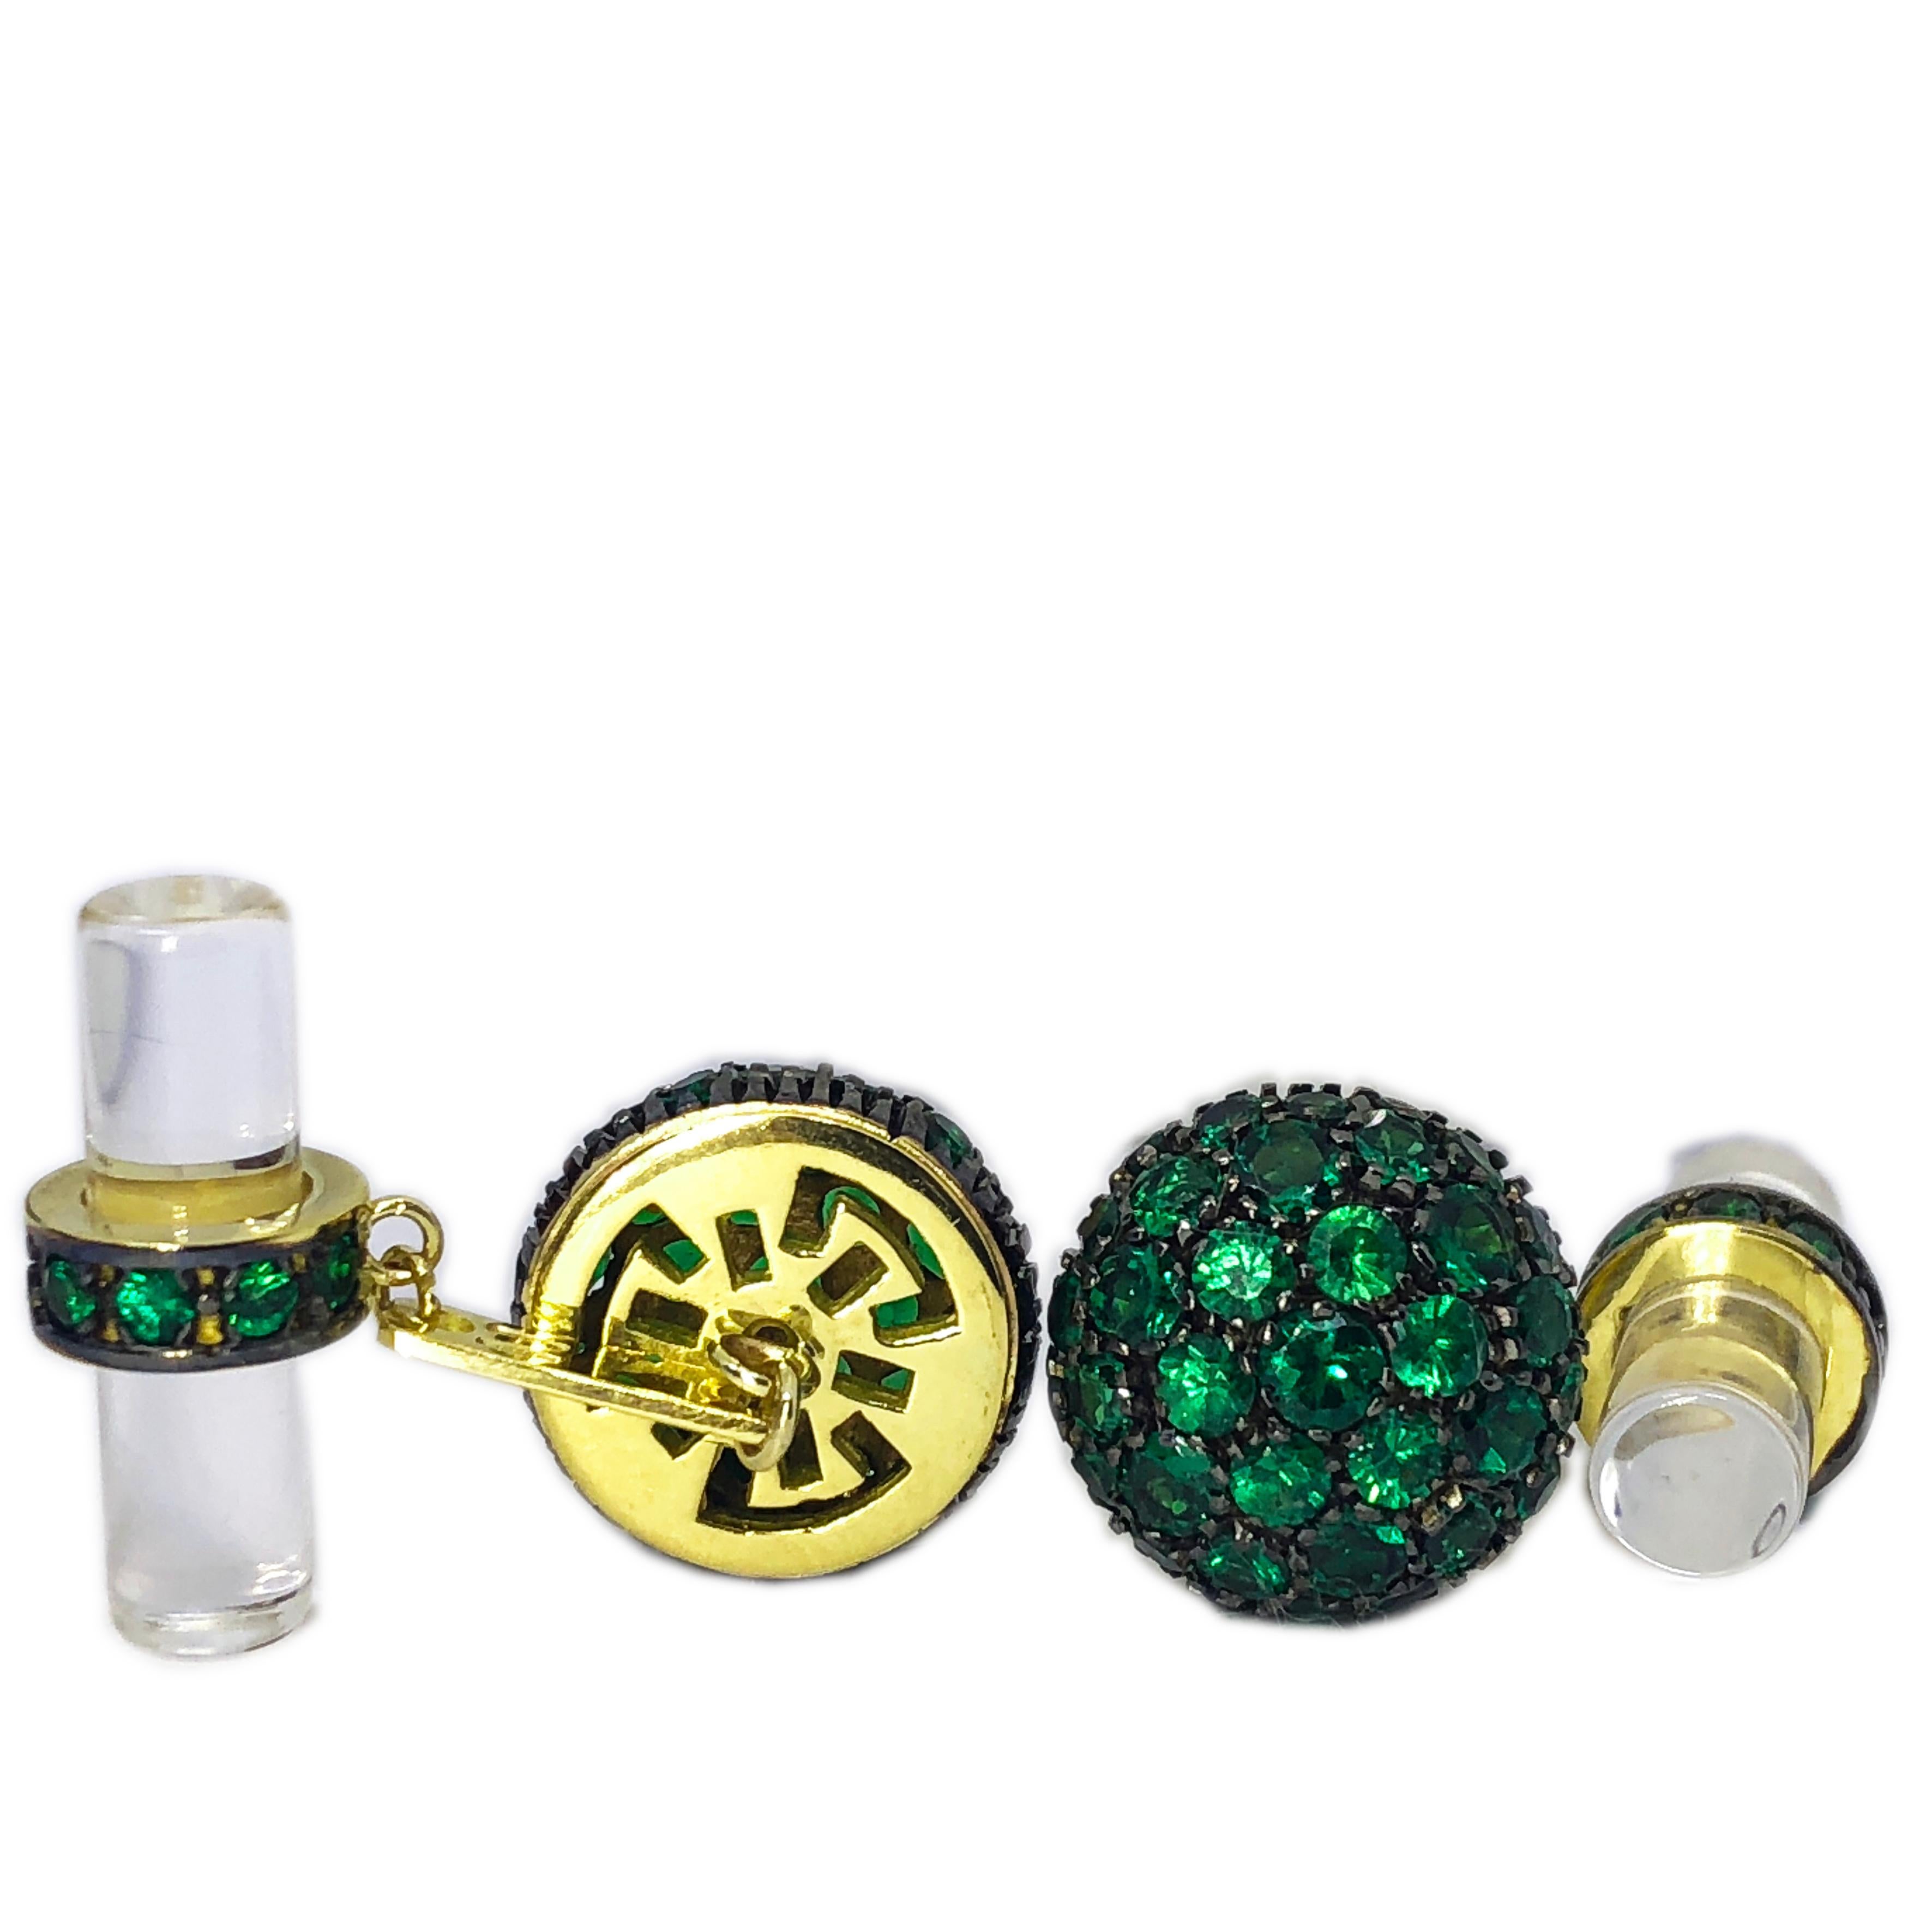 Smart Chic and Timeless 5.28 Carat Round Natural Amazing Green Tsavorite Oxidized Black and Yellow 18 Kt Gold Setting, 9 Carat Natural Hand Inlaid Rock Crystal Baton Back.
In our fitted black box and pouch.
